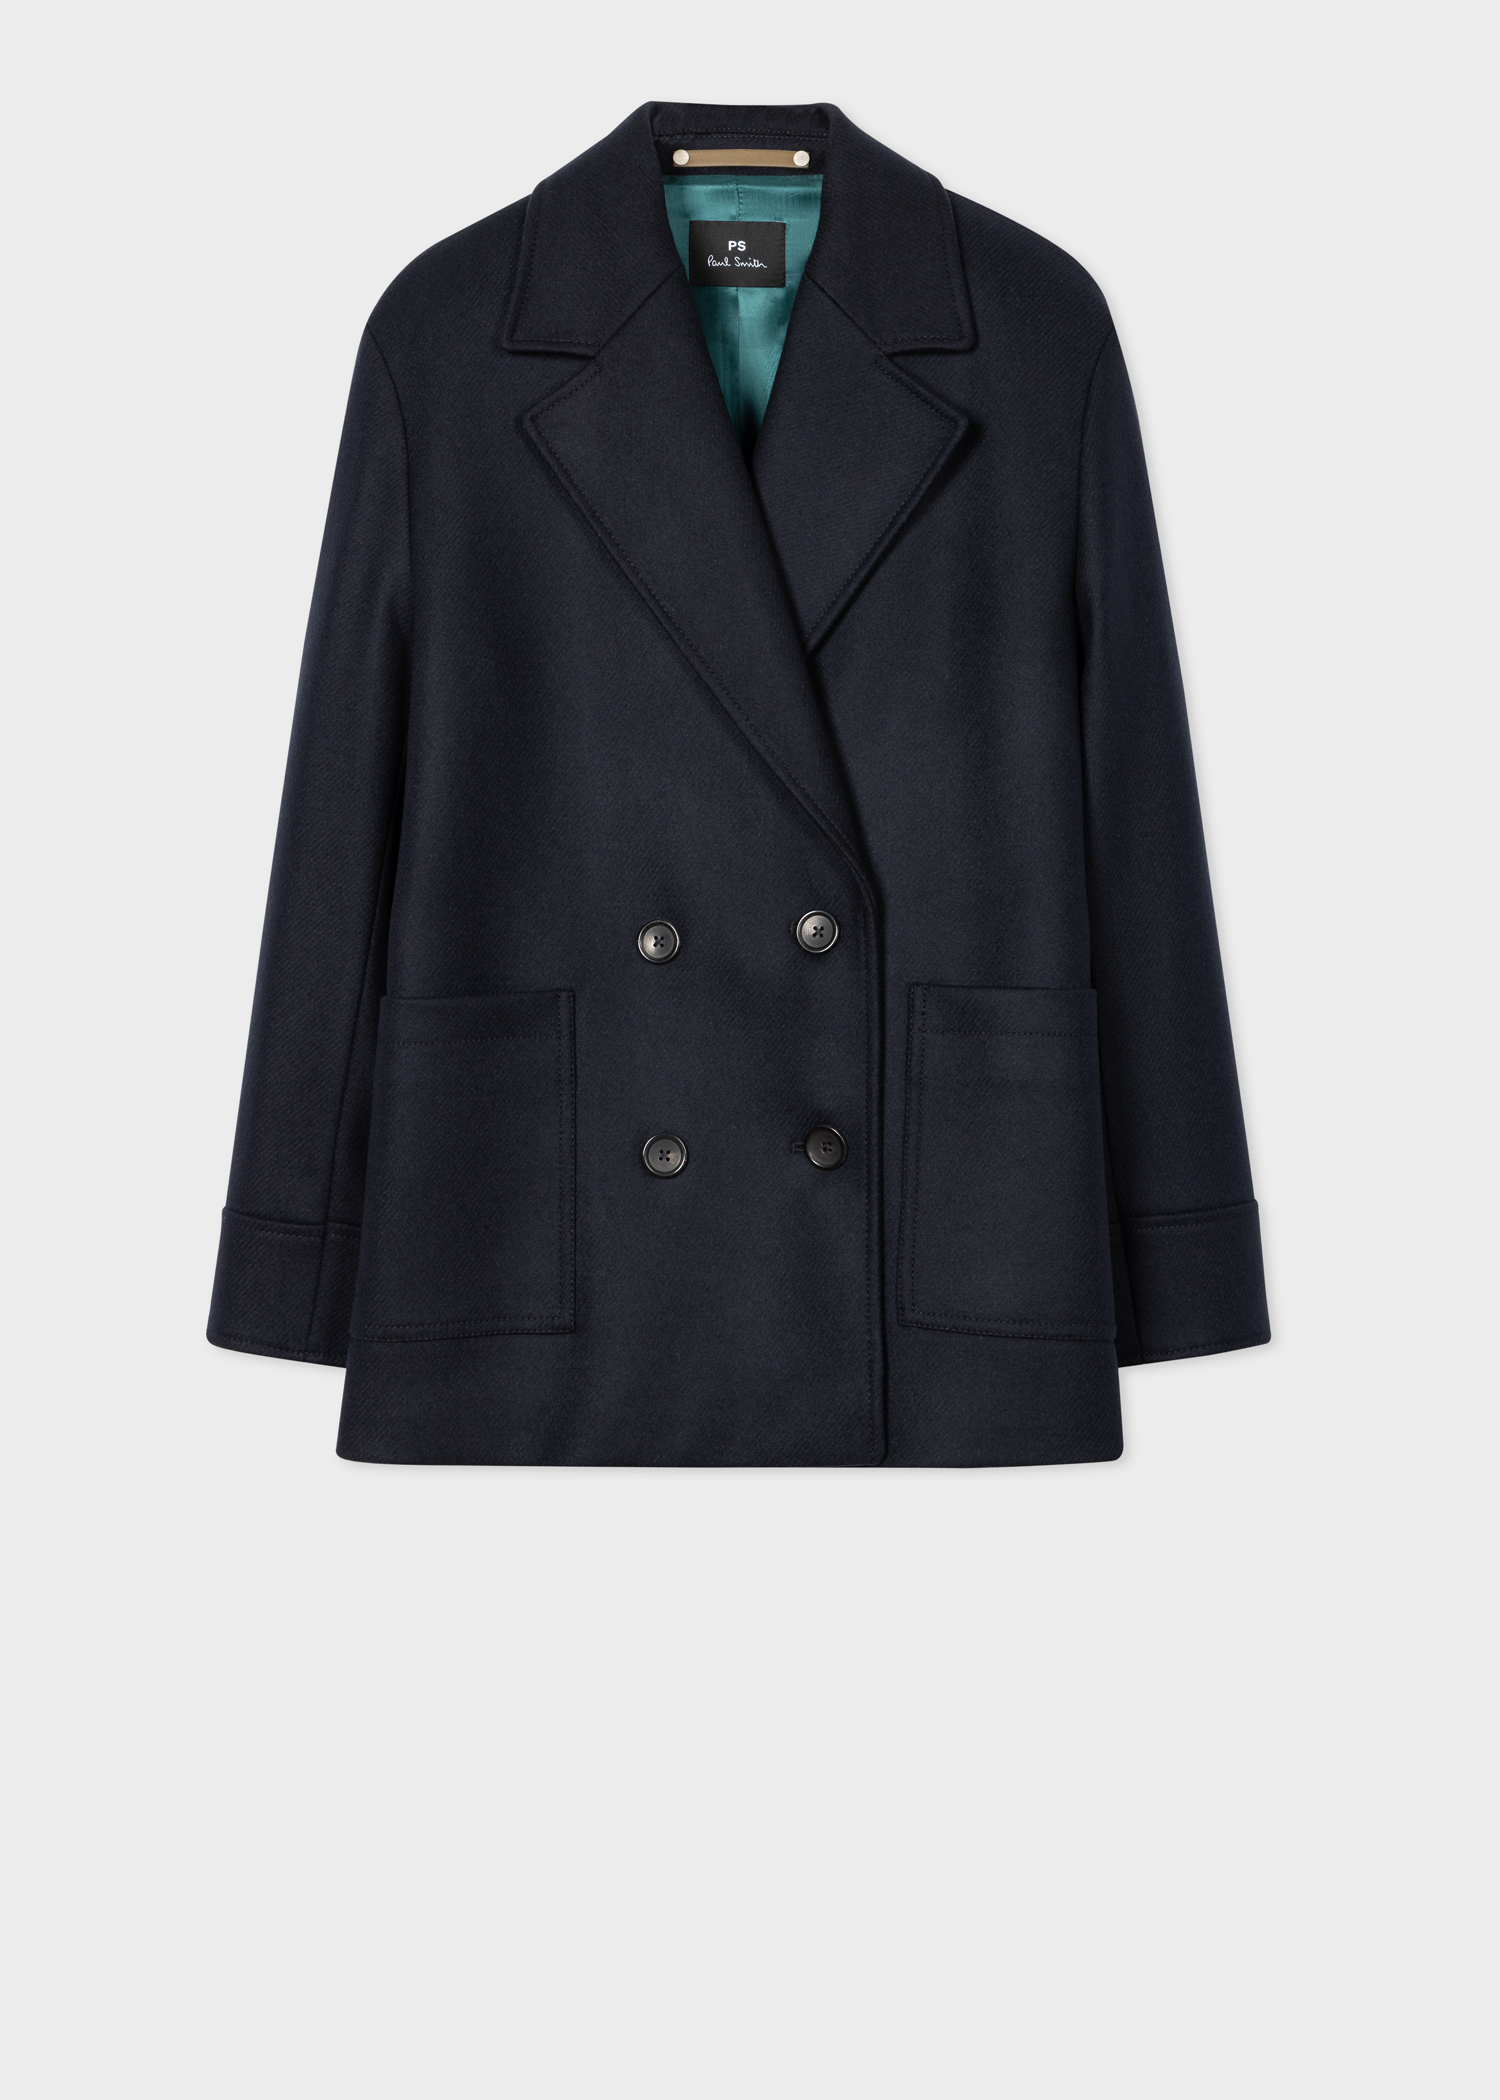 PAUL SMITH Wool and Cashmere-Blend Overcoat for Men